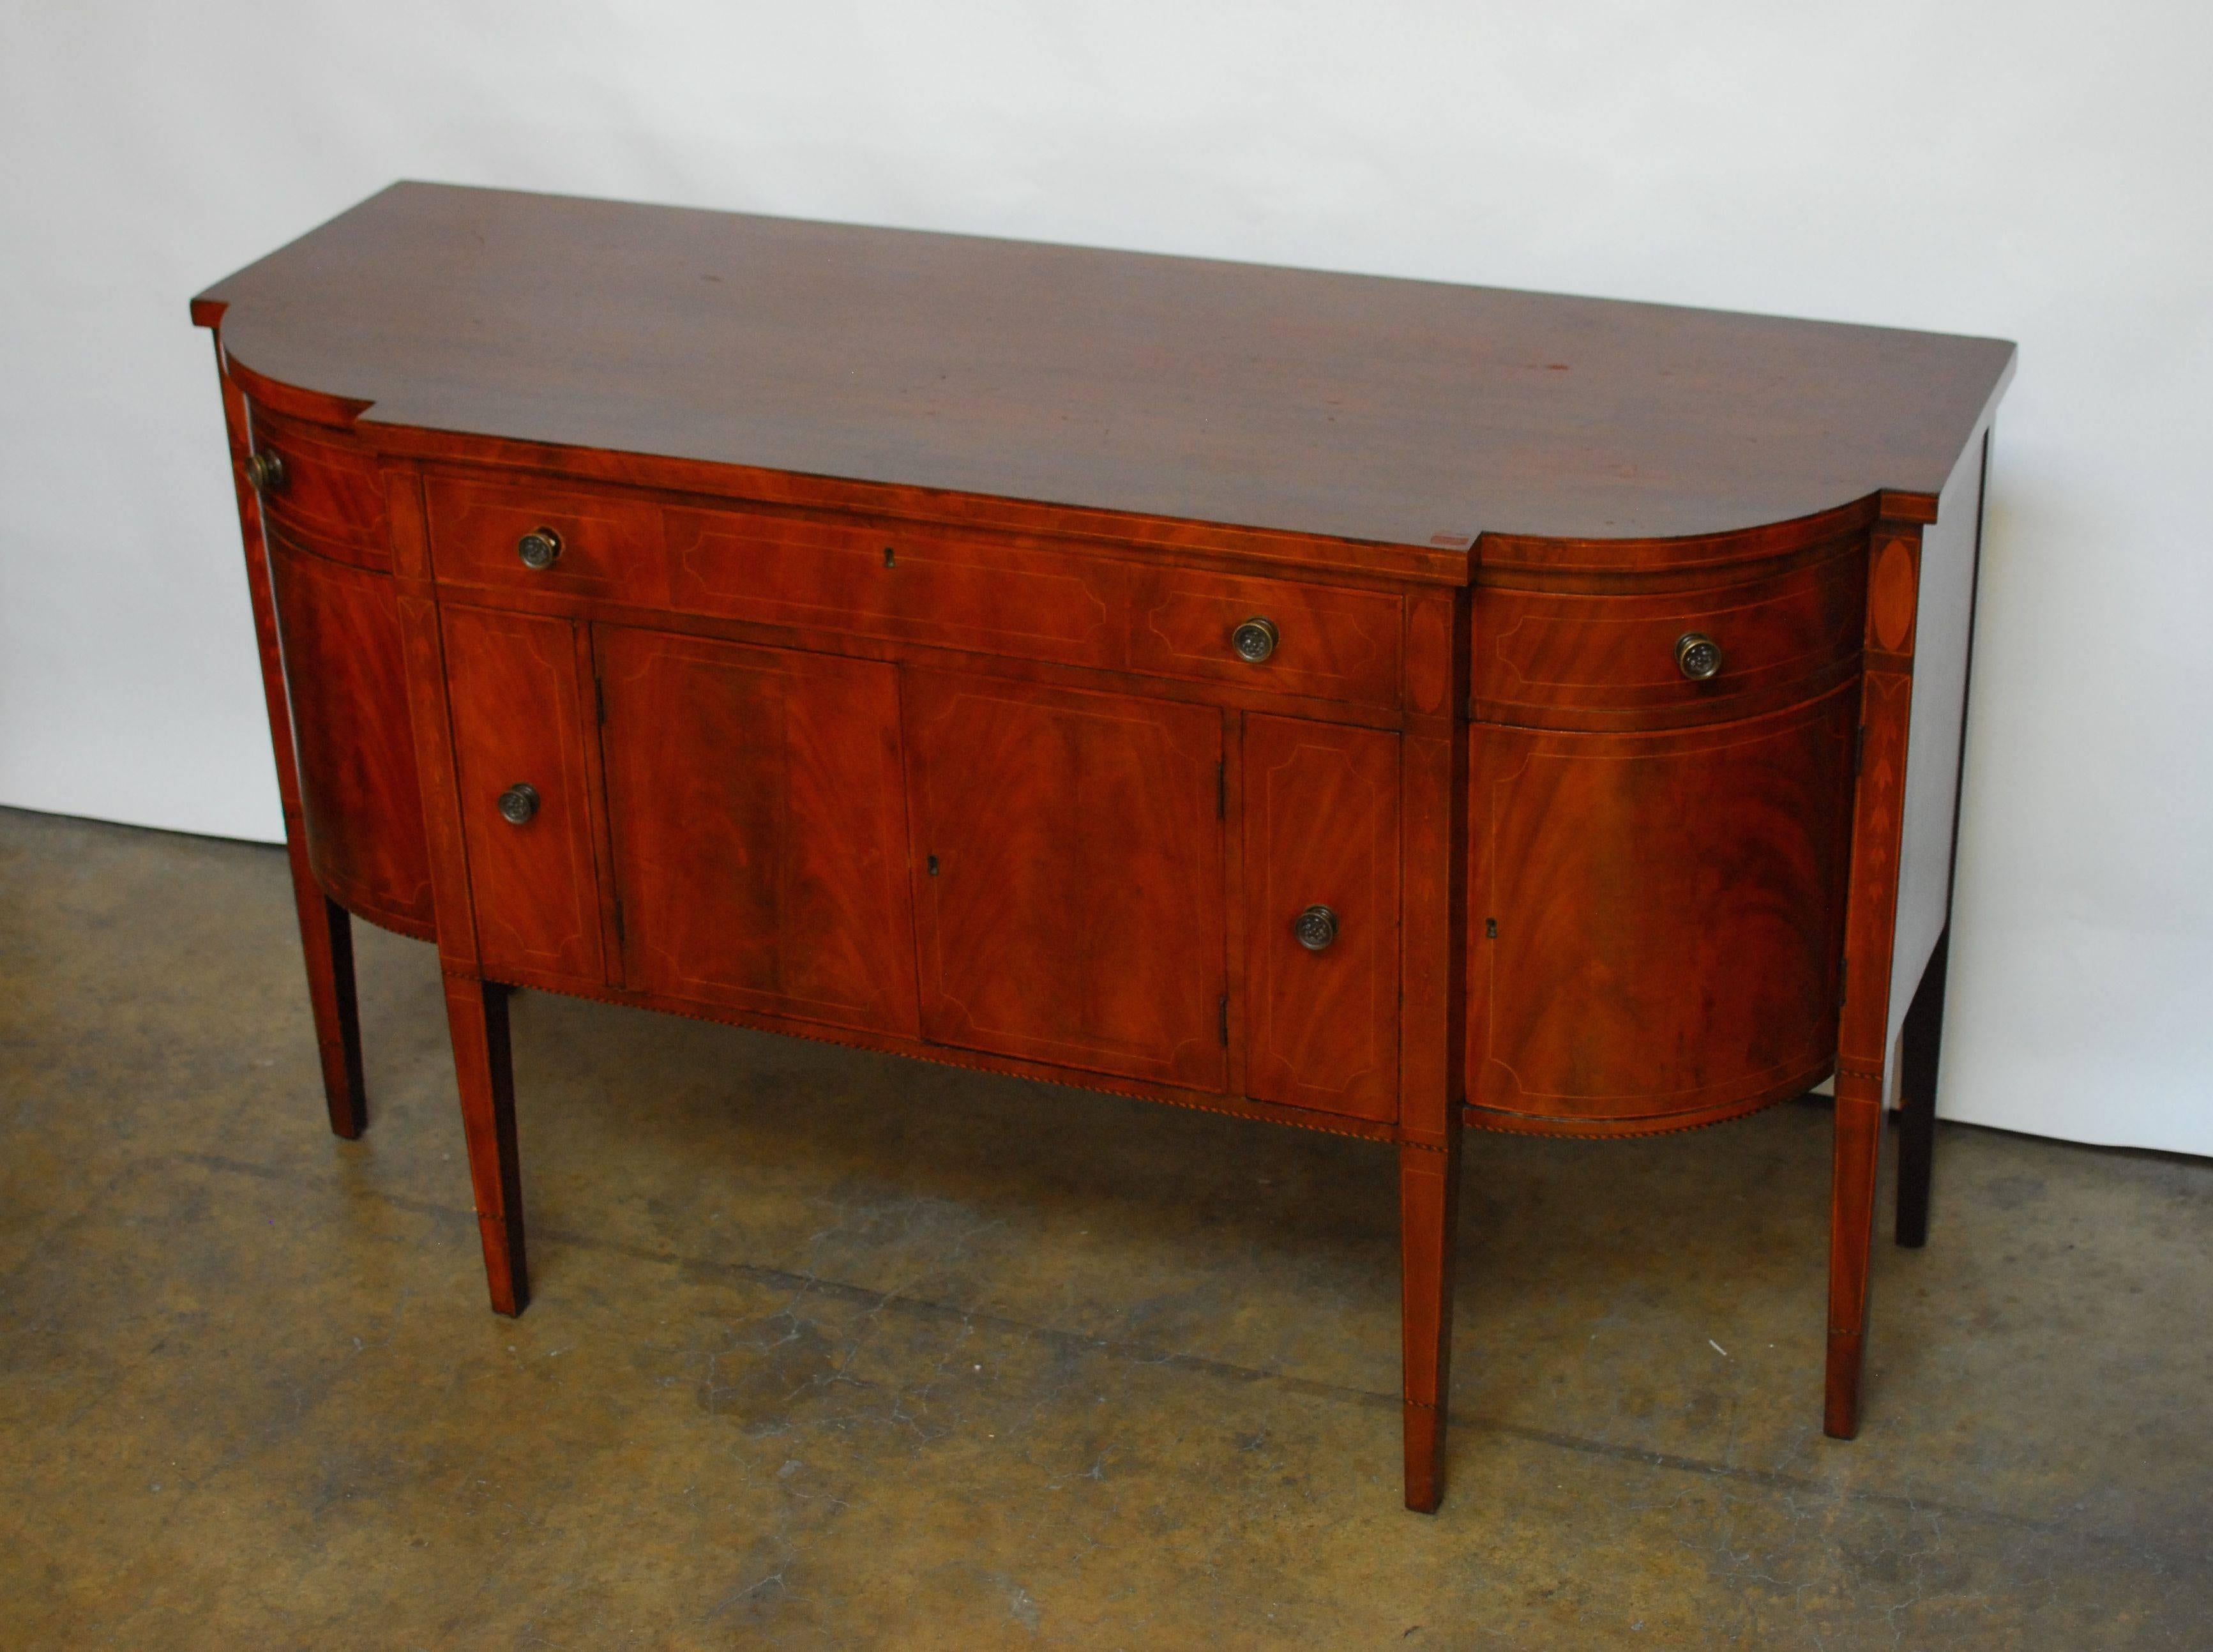 Exceptional 19th century bow front mahogany sideboard finely constructed with flowing grains of mahogany veneers throughout the front. Fully developed sideboard with bottle drawers and flanked by convex side drawers. Embellished with line inlay on